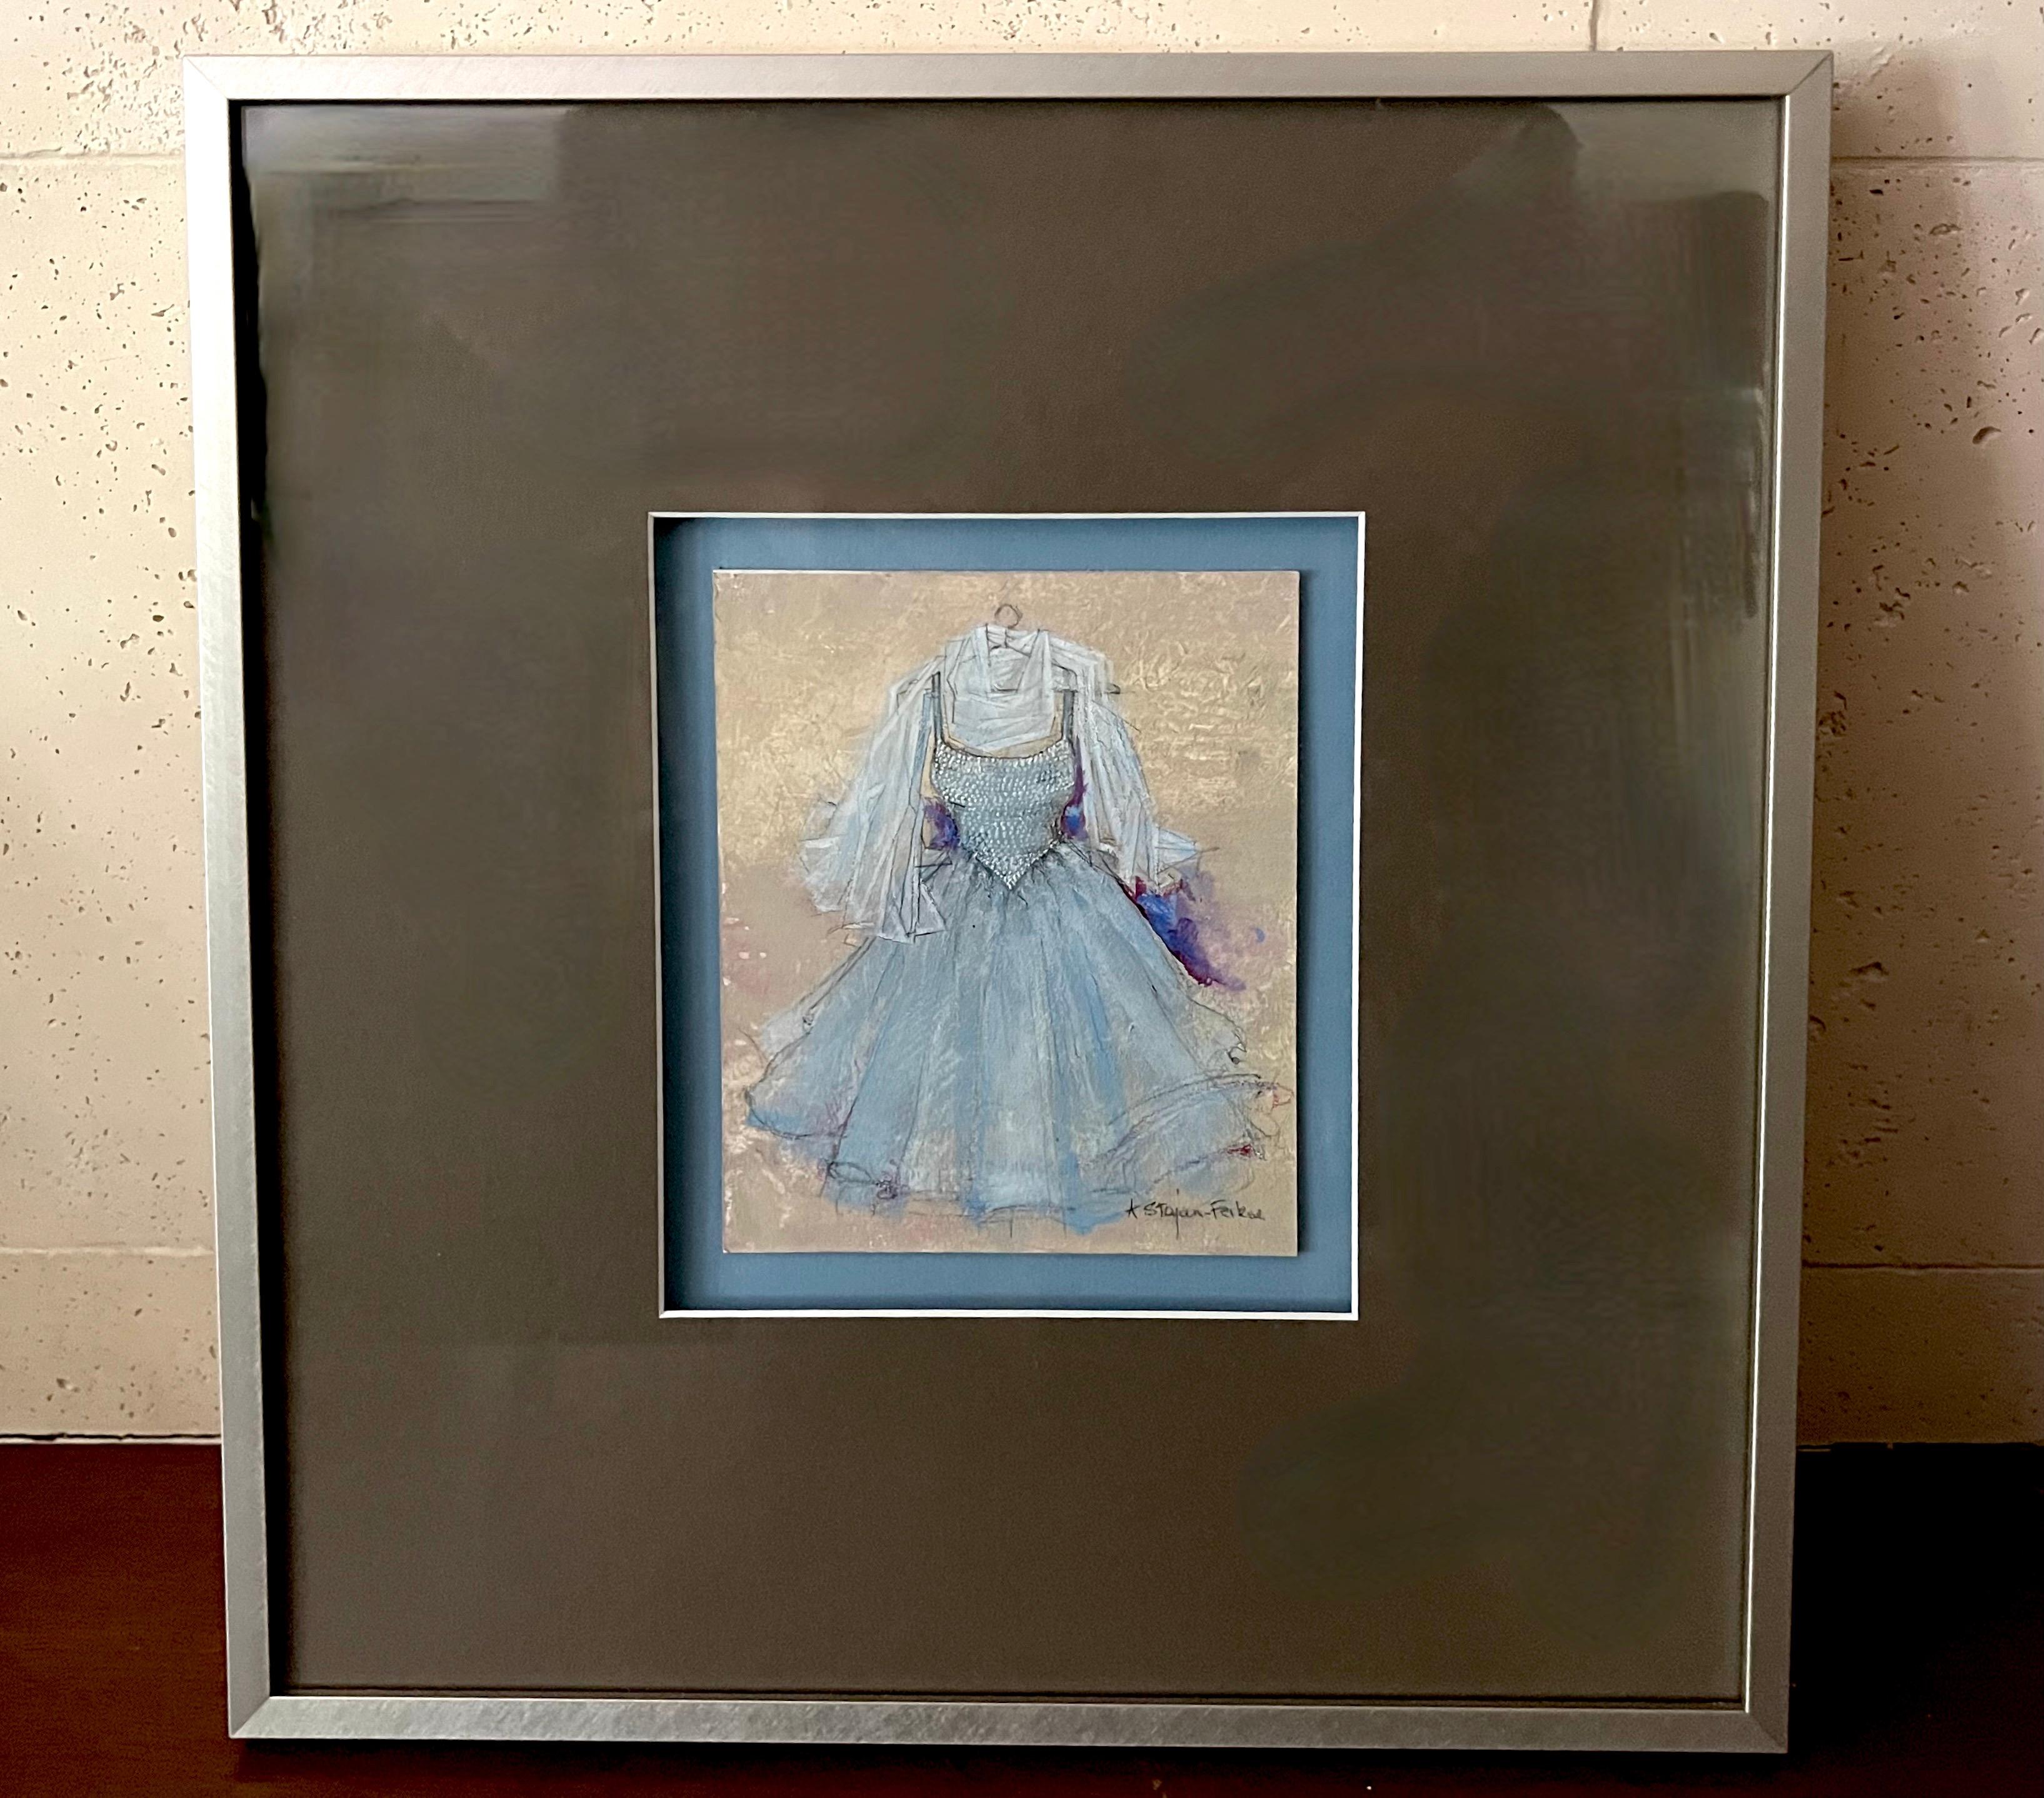 An air of femininity is expressed in this chiffon style dress painting on art board, a nostalgic nod to the graduation, prom or bridesmaid dress. Delicate detail builds up a soft texture over translucent layers of pastel blue. The combination of